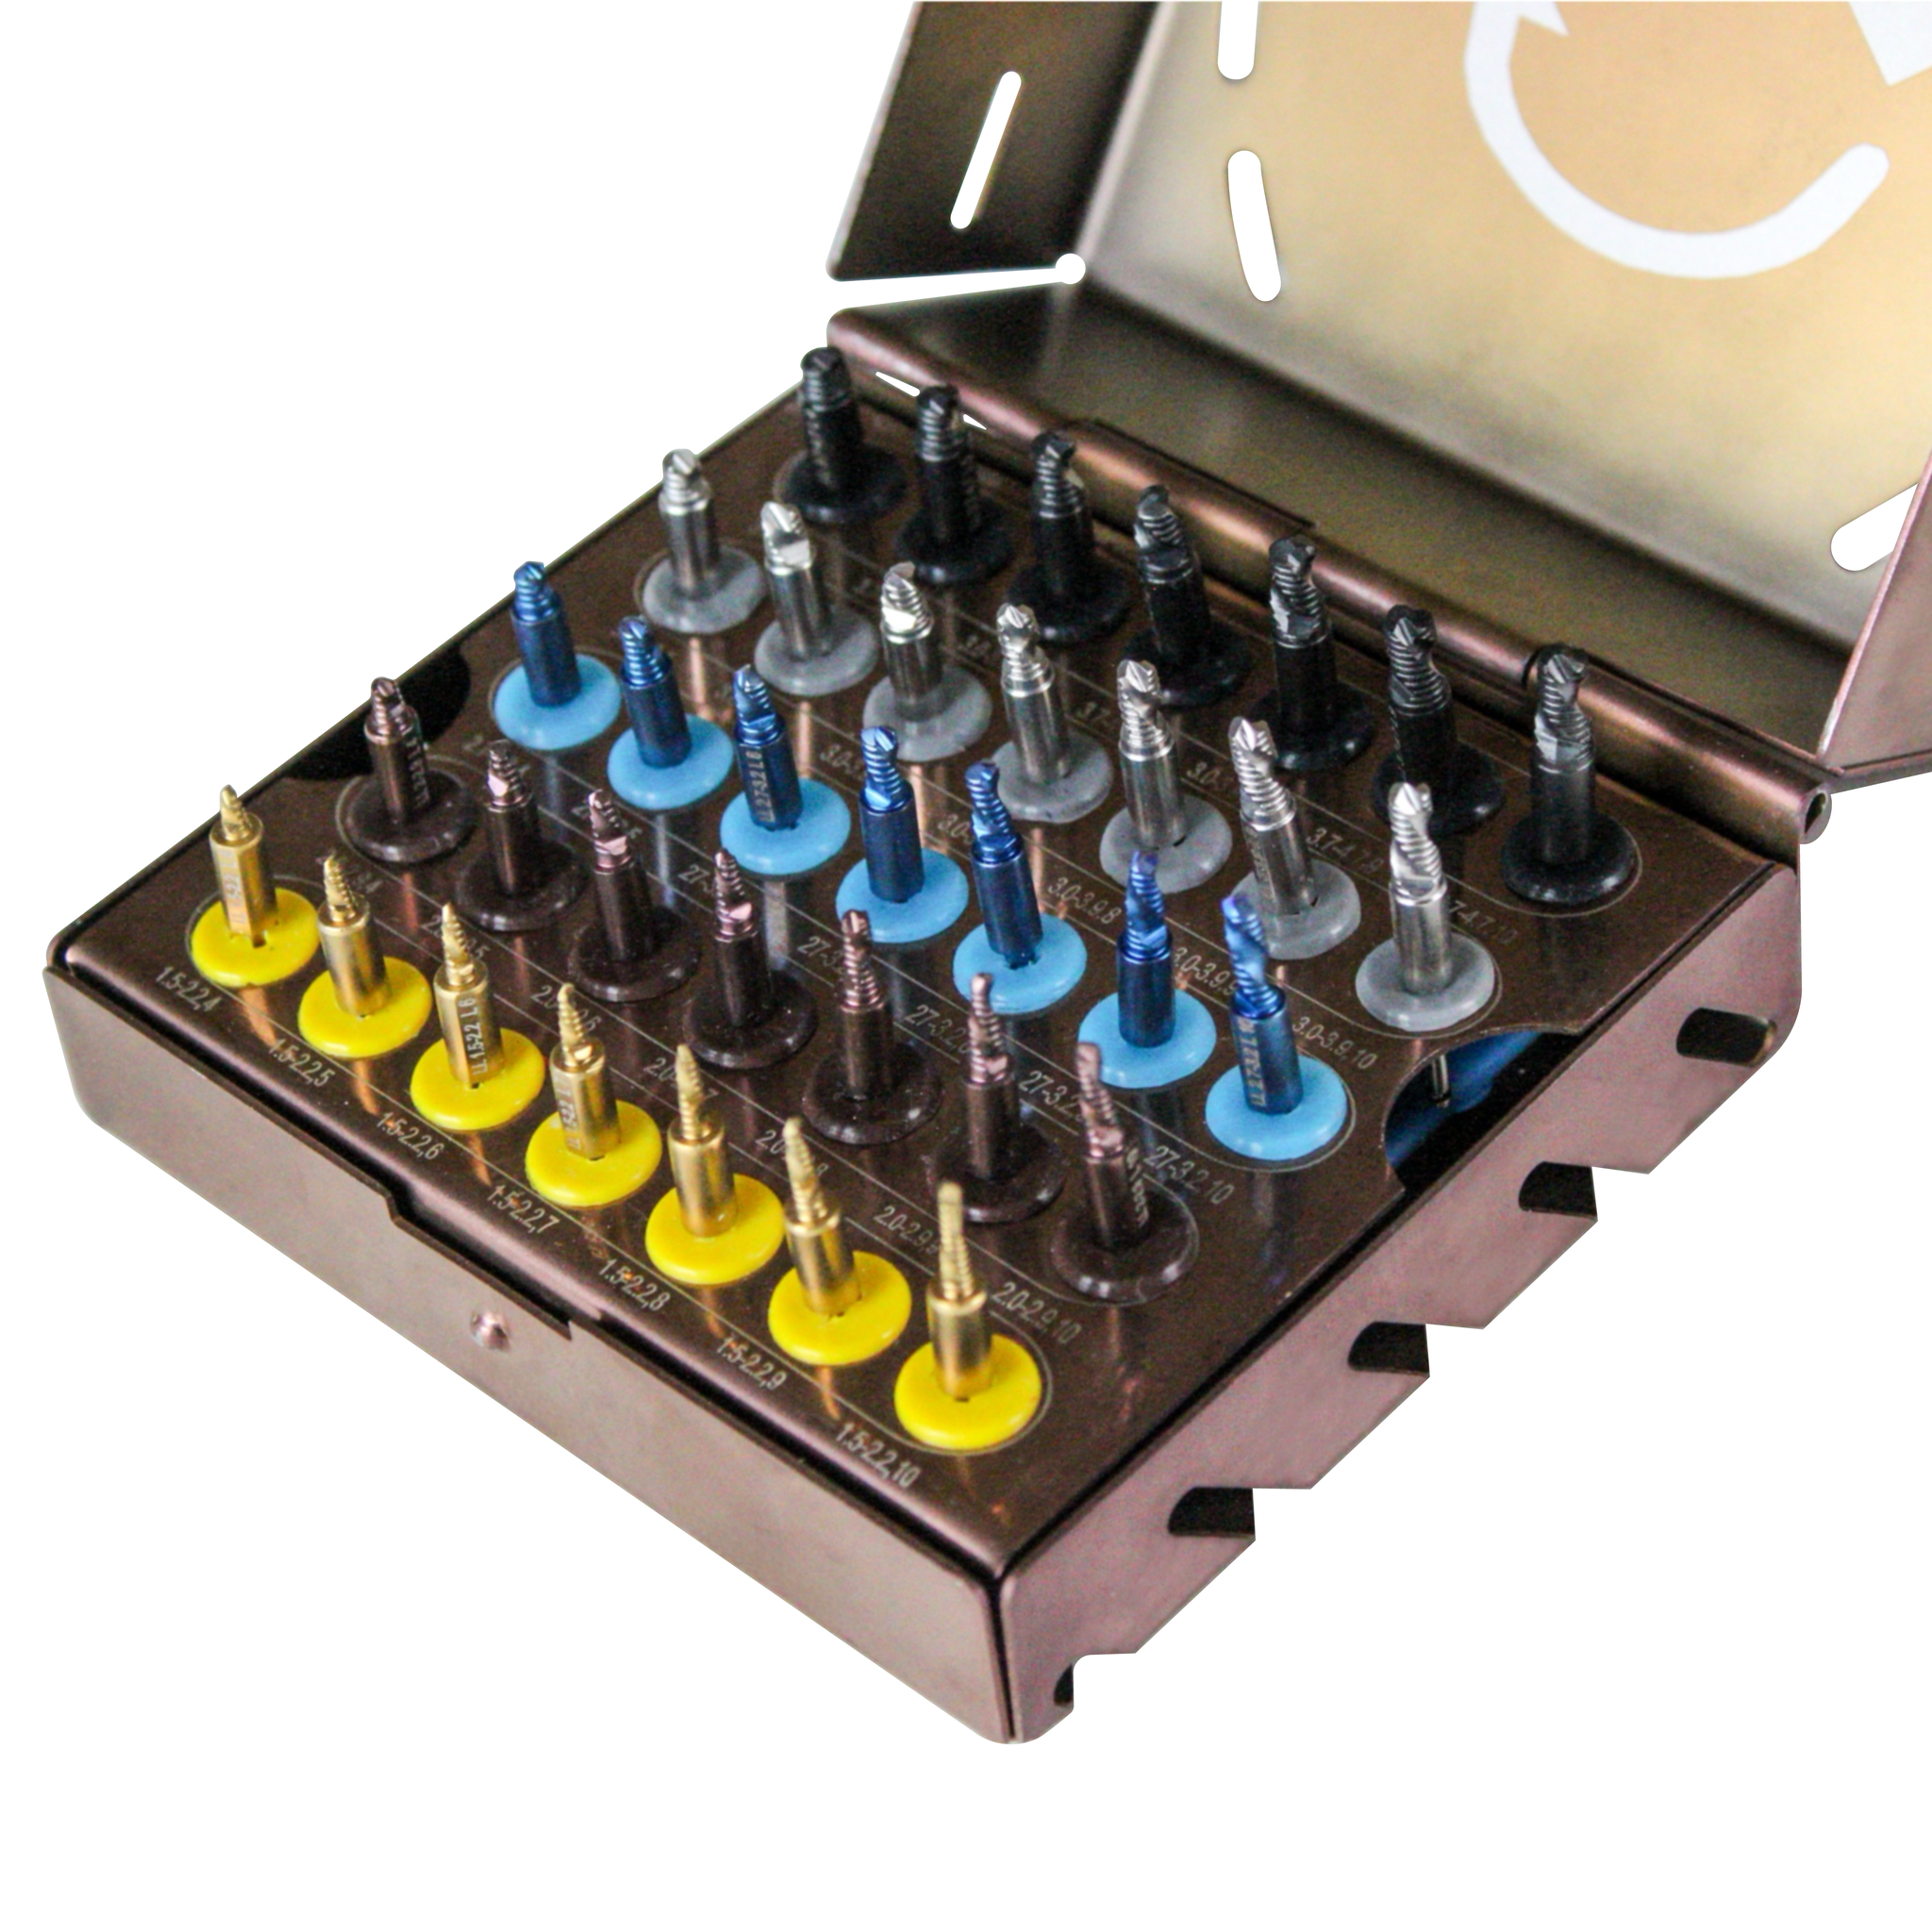 An open maroon square box with 5 color coded rows of 6 drill storage slots each. The top row starts with 3.7 to 4.7 millimeter diameter drills in lengths from 4 to 10 millimeters. The bottom row ends with 1.5 to 2.2 millimeter diameter drills in lengths from 4 to 10 millimeters.